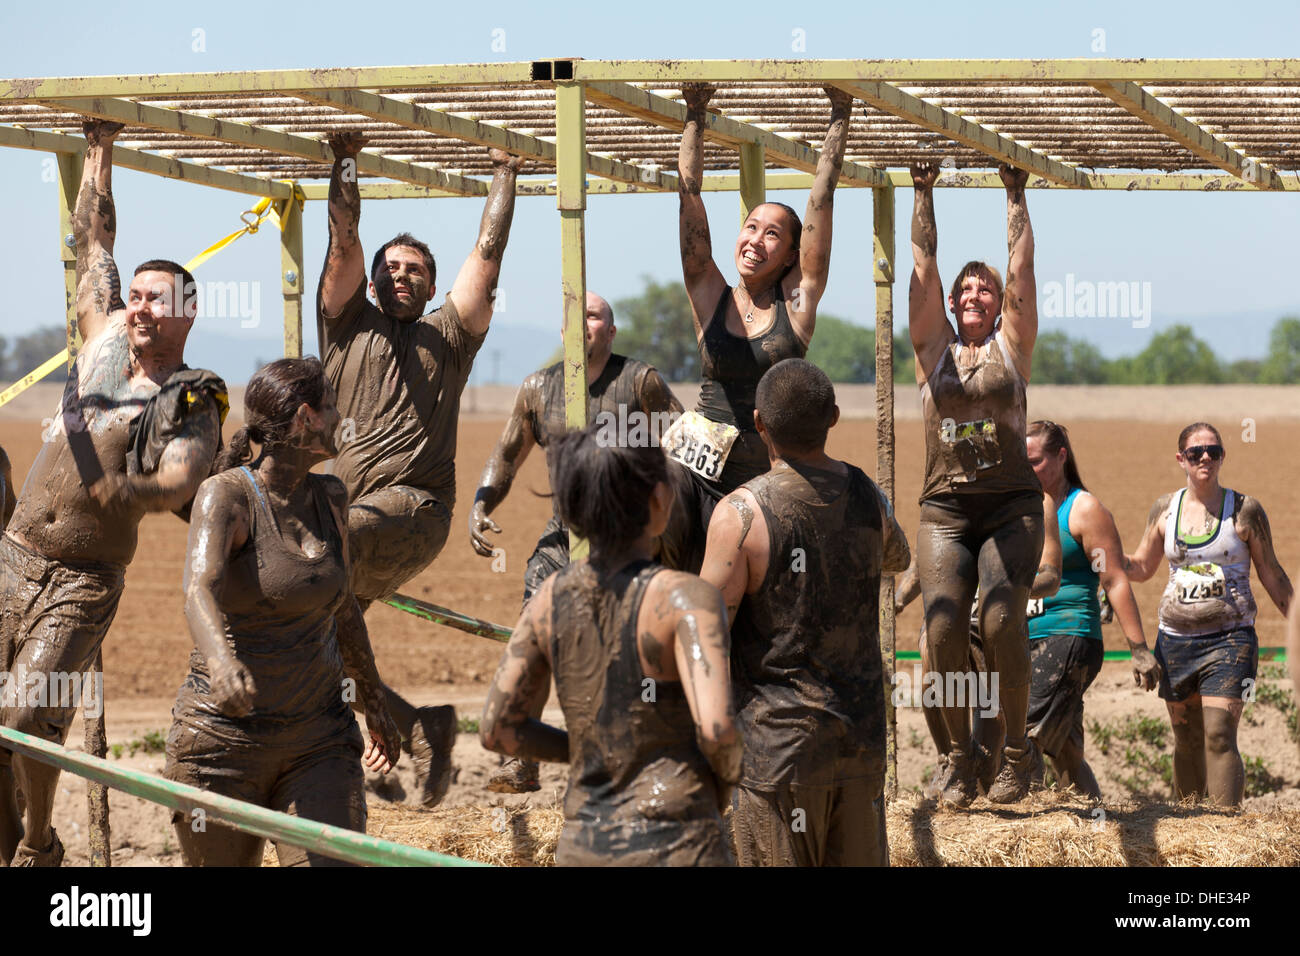 Mud run participants on obstacle course California USA Stock Photo